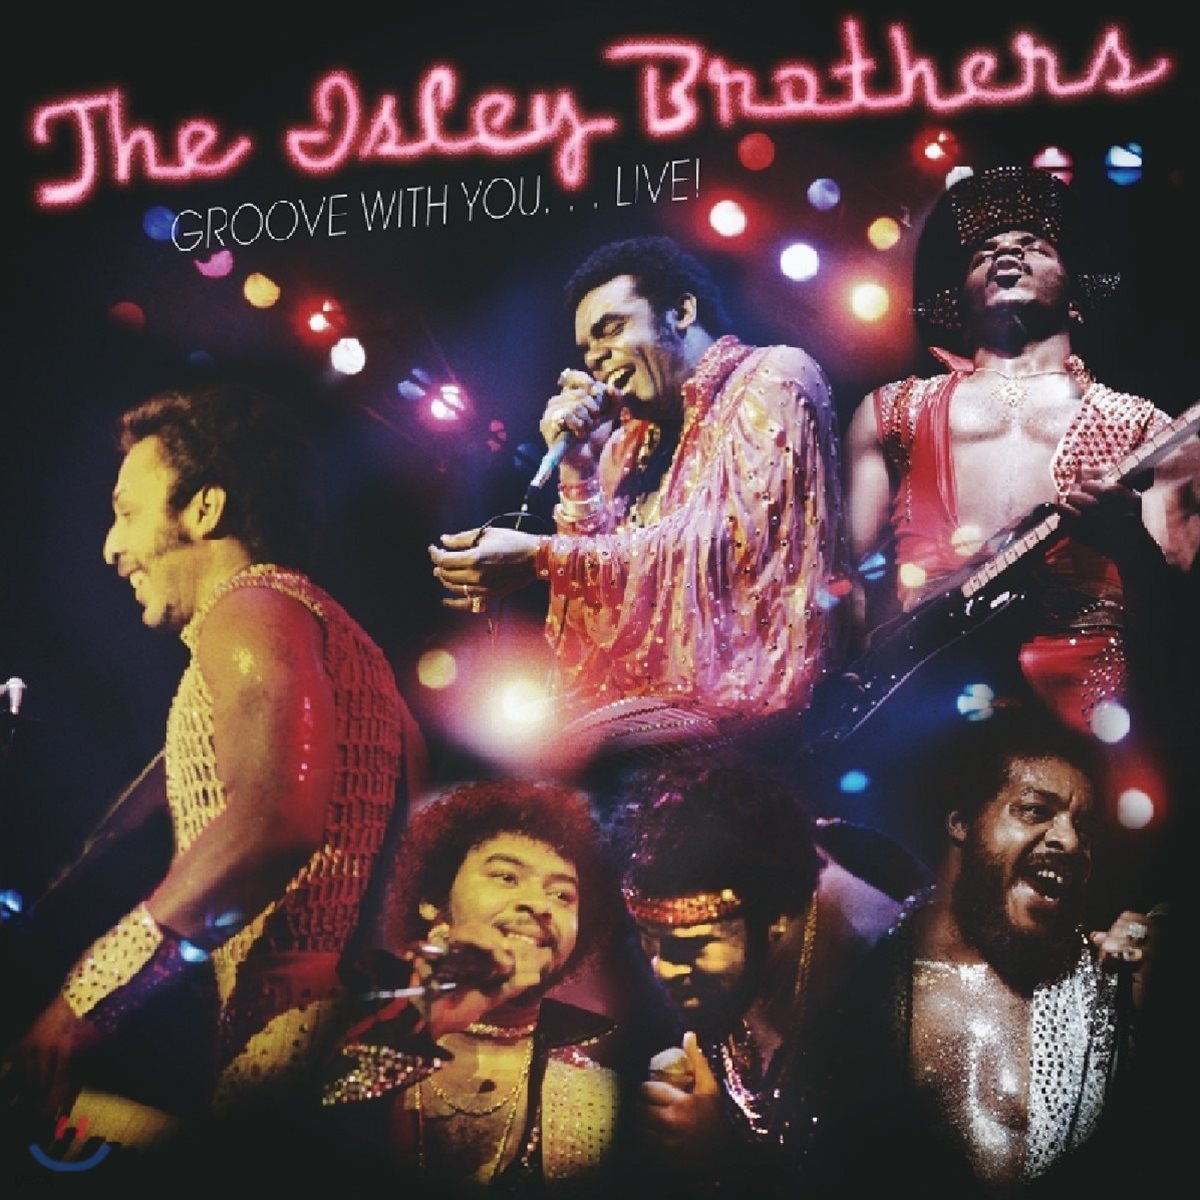 The Isley Brothers (아이슬리 브라더스) - Groove With You...Live!